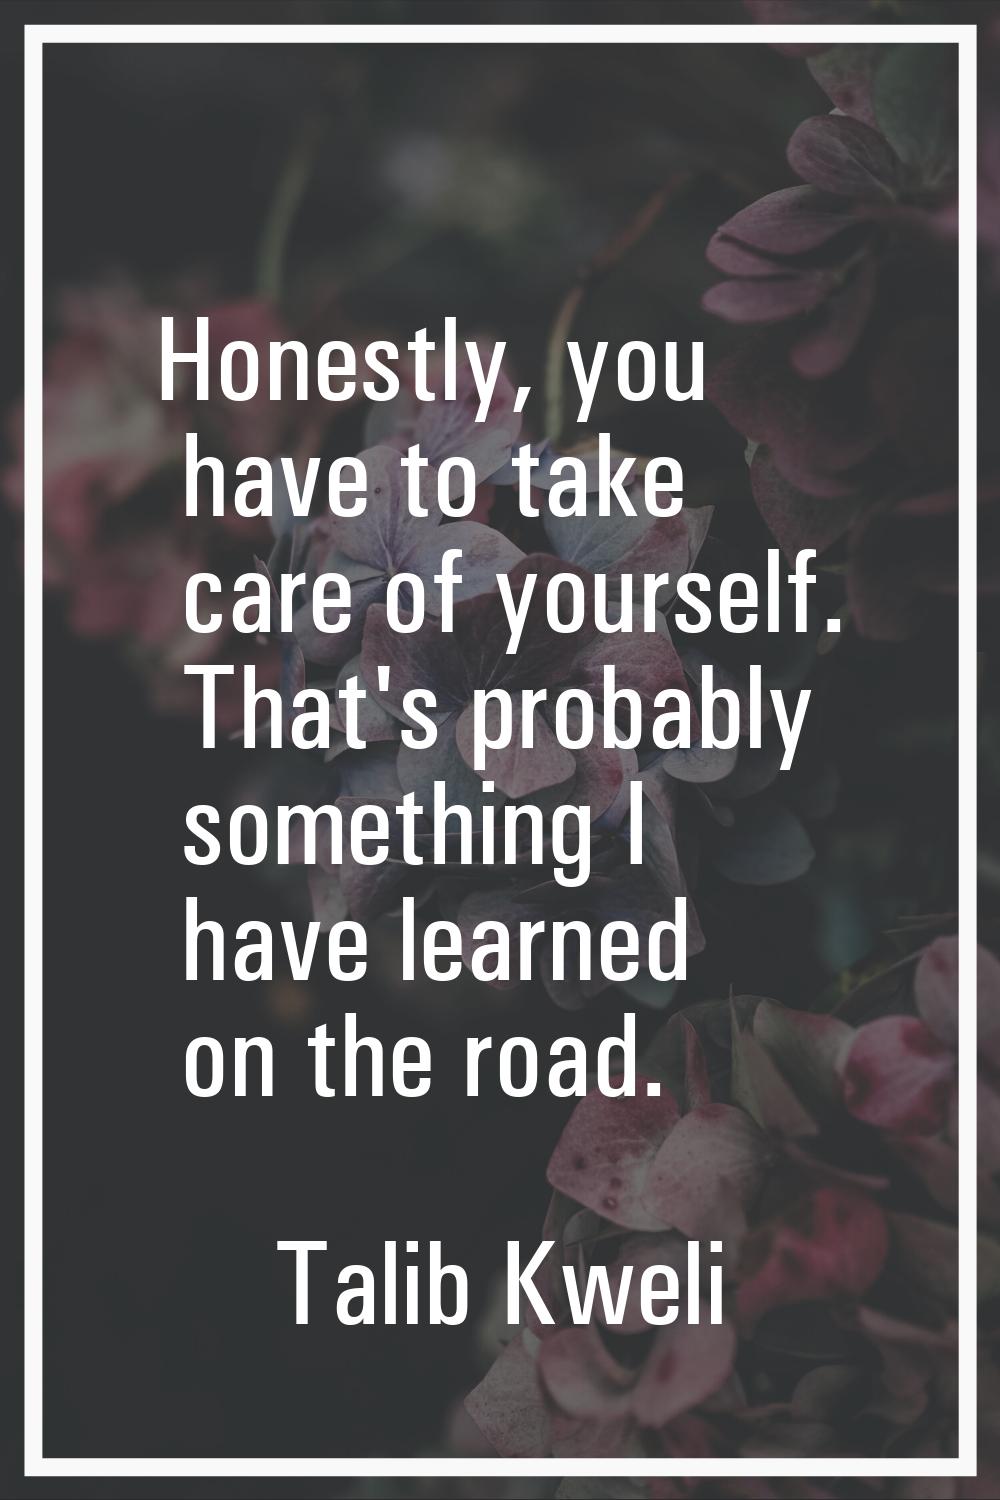 Honestly, you have to take care of yourself. That's probably something I have learned on the road.